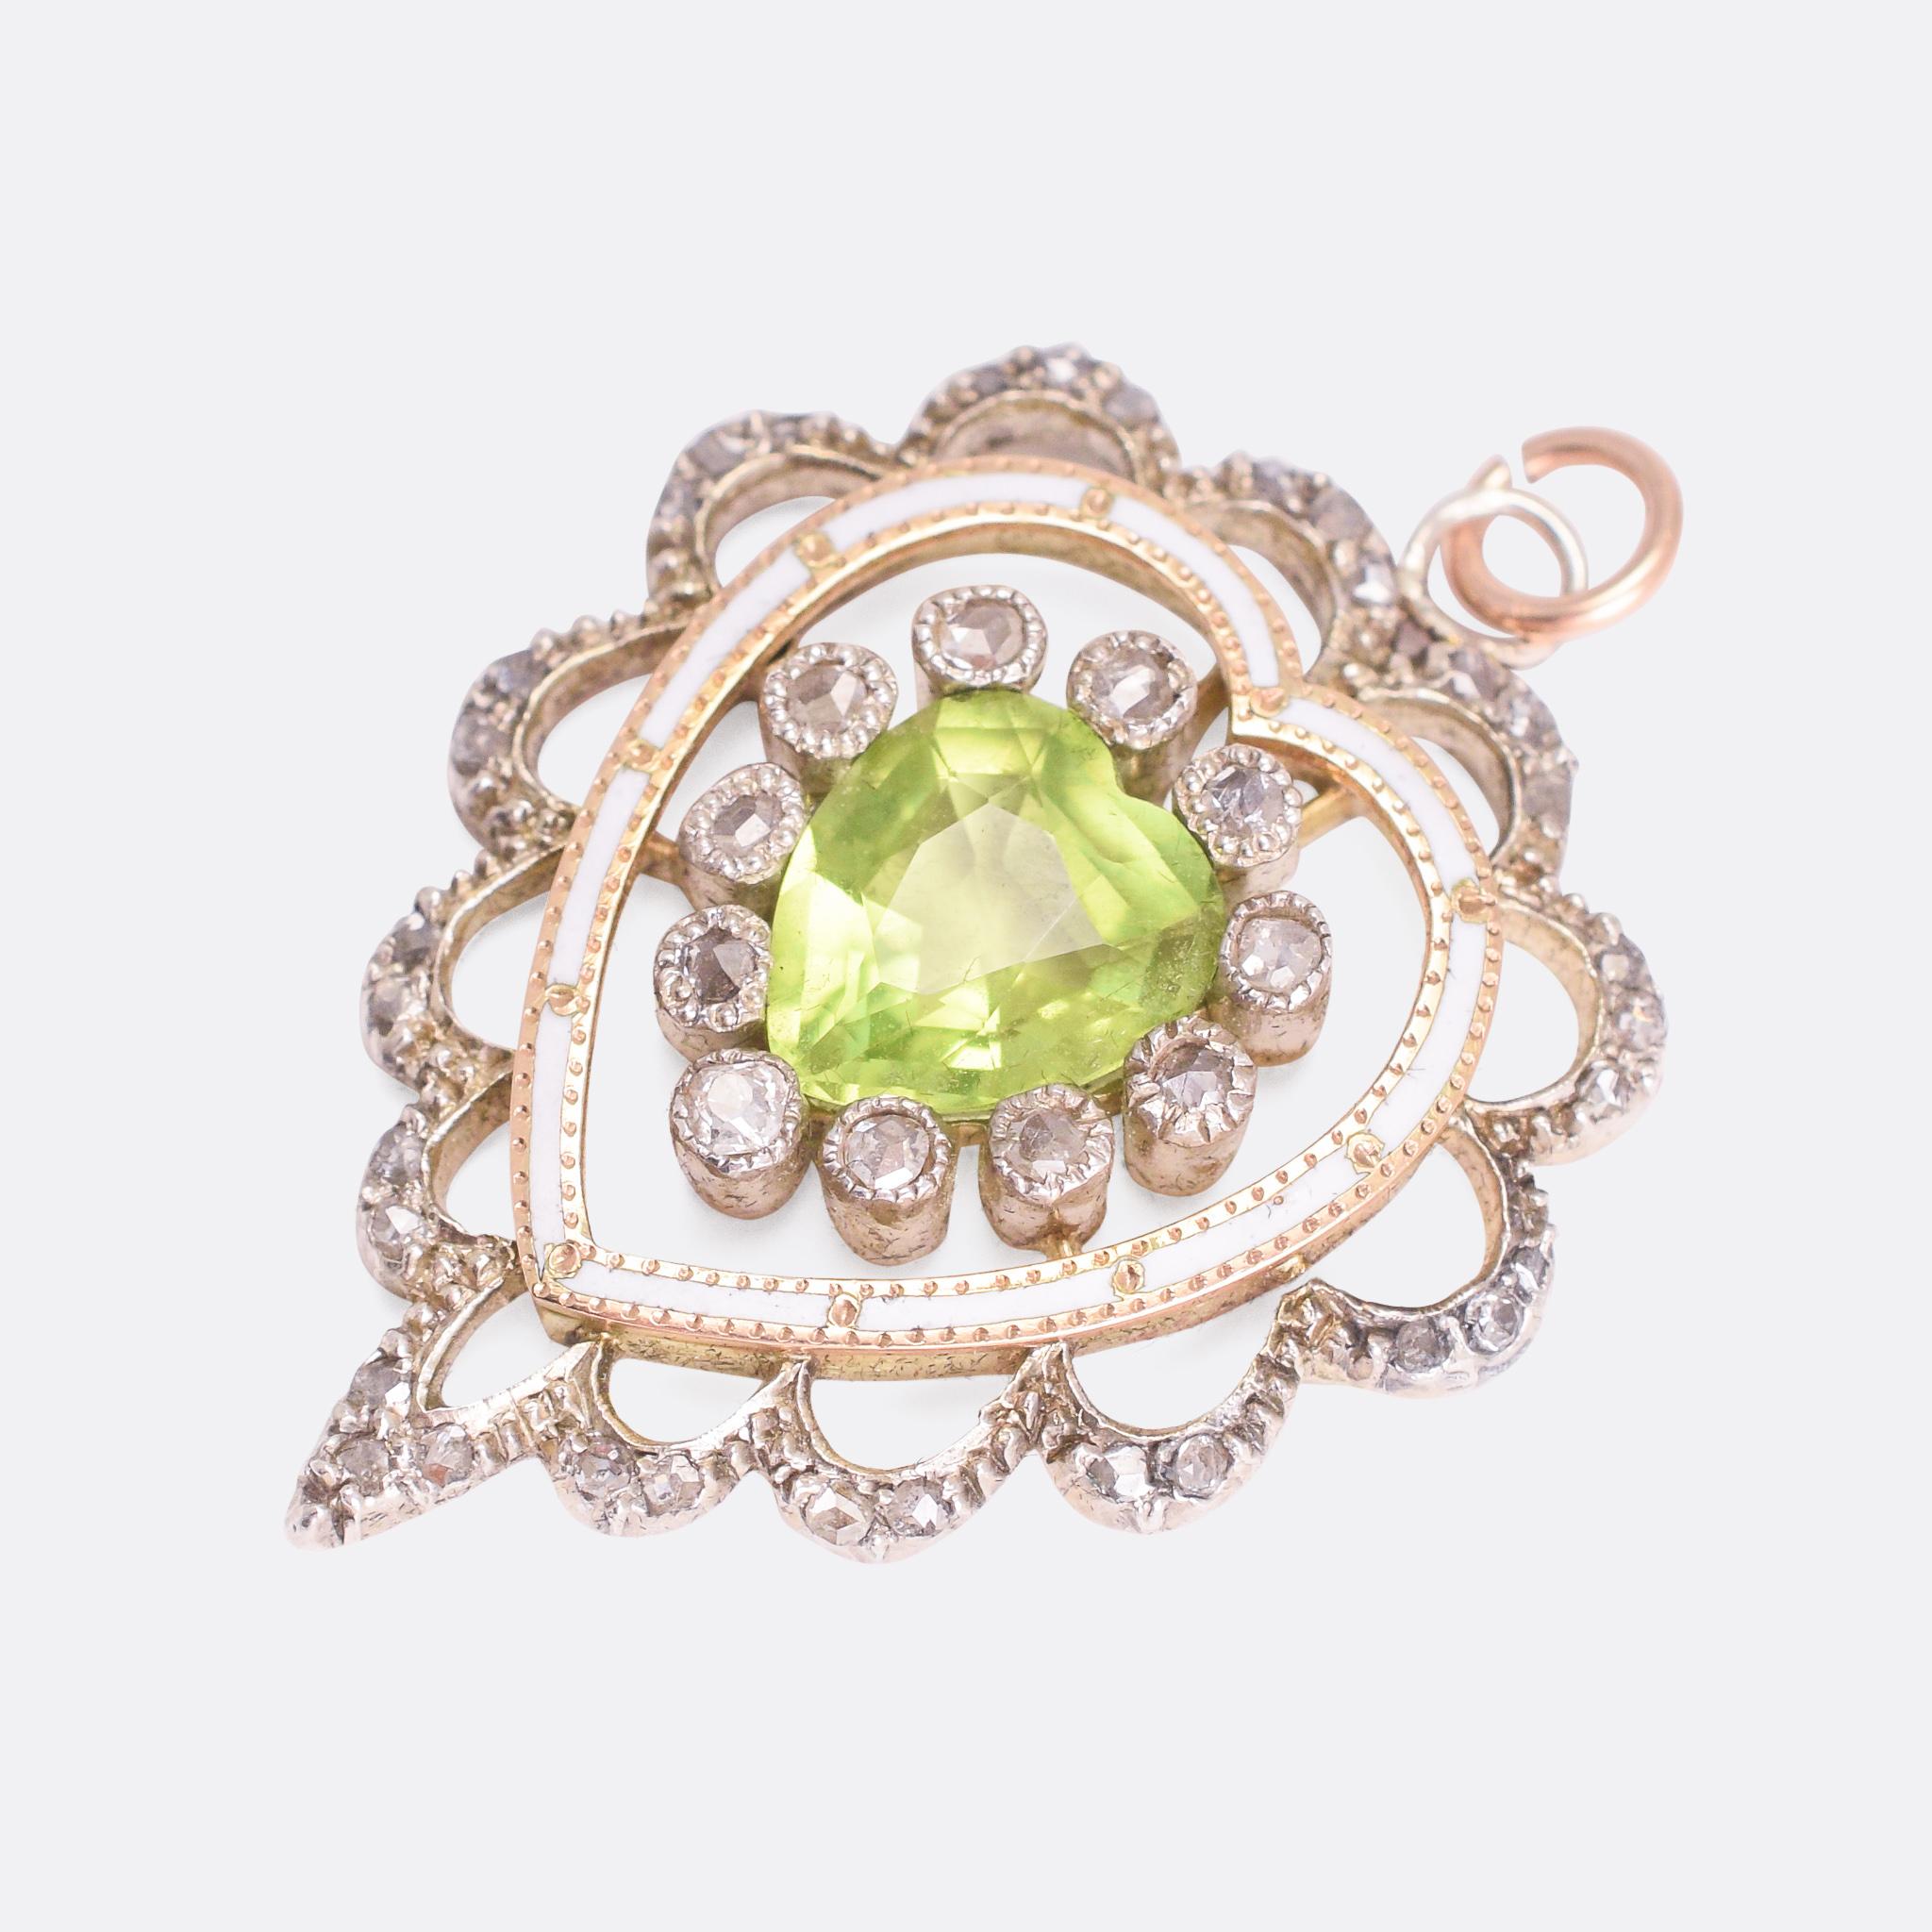 A beautiful antique heart pendant featuring intricate openwork and fine white enamel. The central stone is a vivid green peridot, embellished by rose cut diamonds within a heart motif. It dates from the latter part of the 19th Century, crafted by